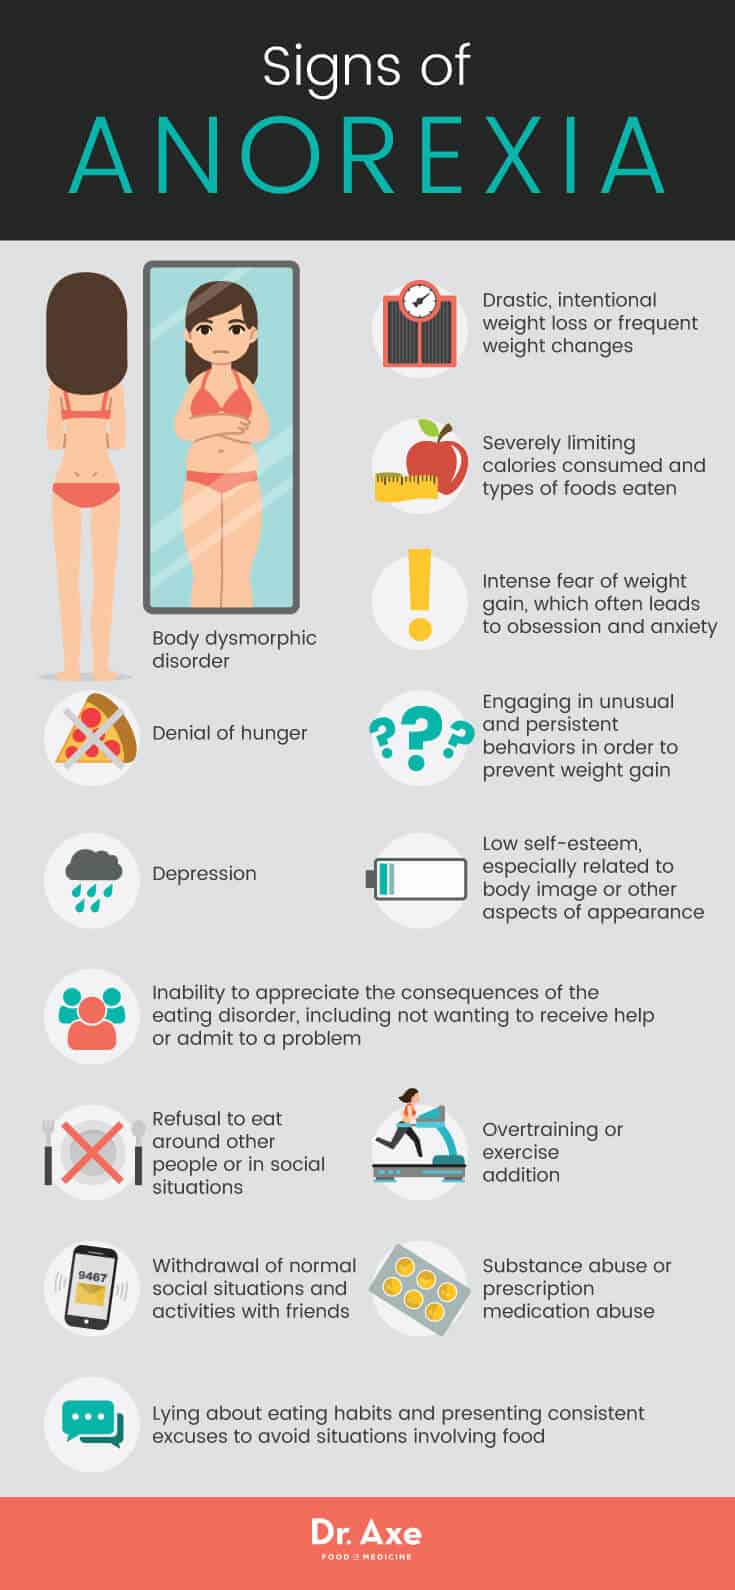 Signs of anorexia - Dr. Axe